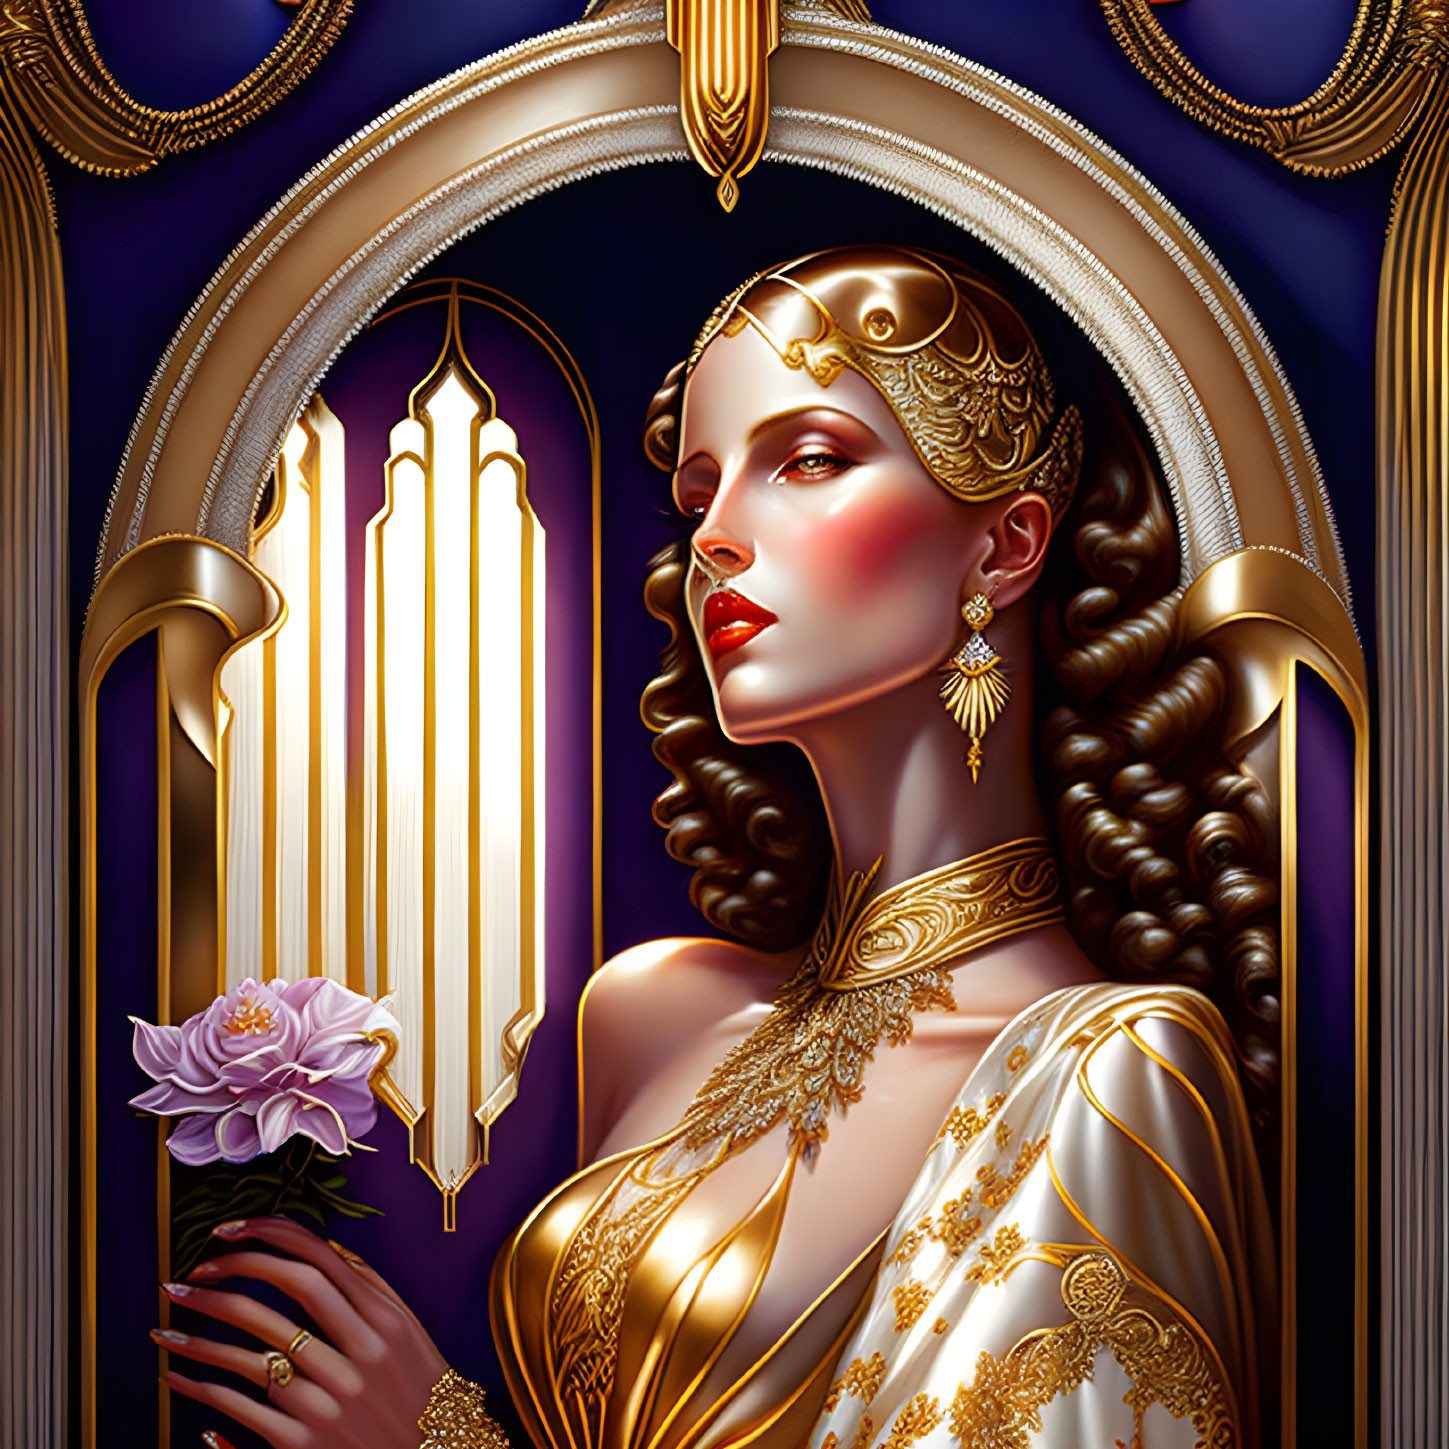 Elegant woman in white gown with gold jewelry and flower under archway